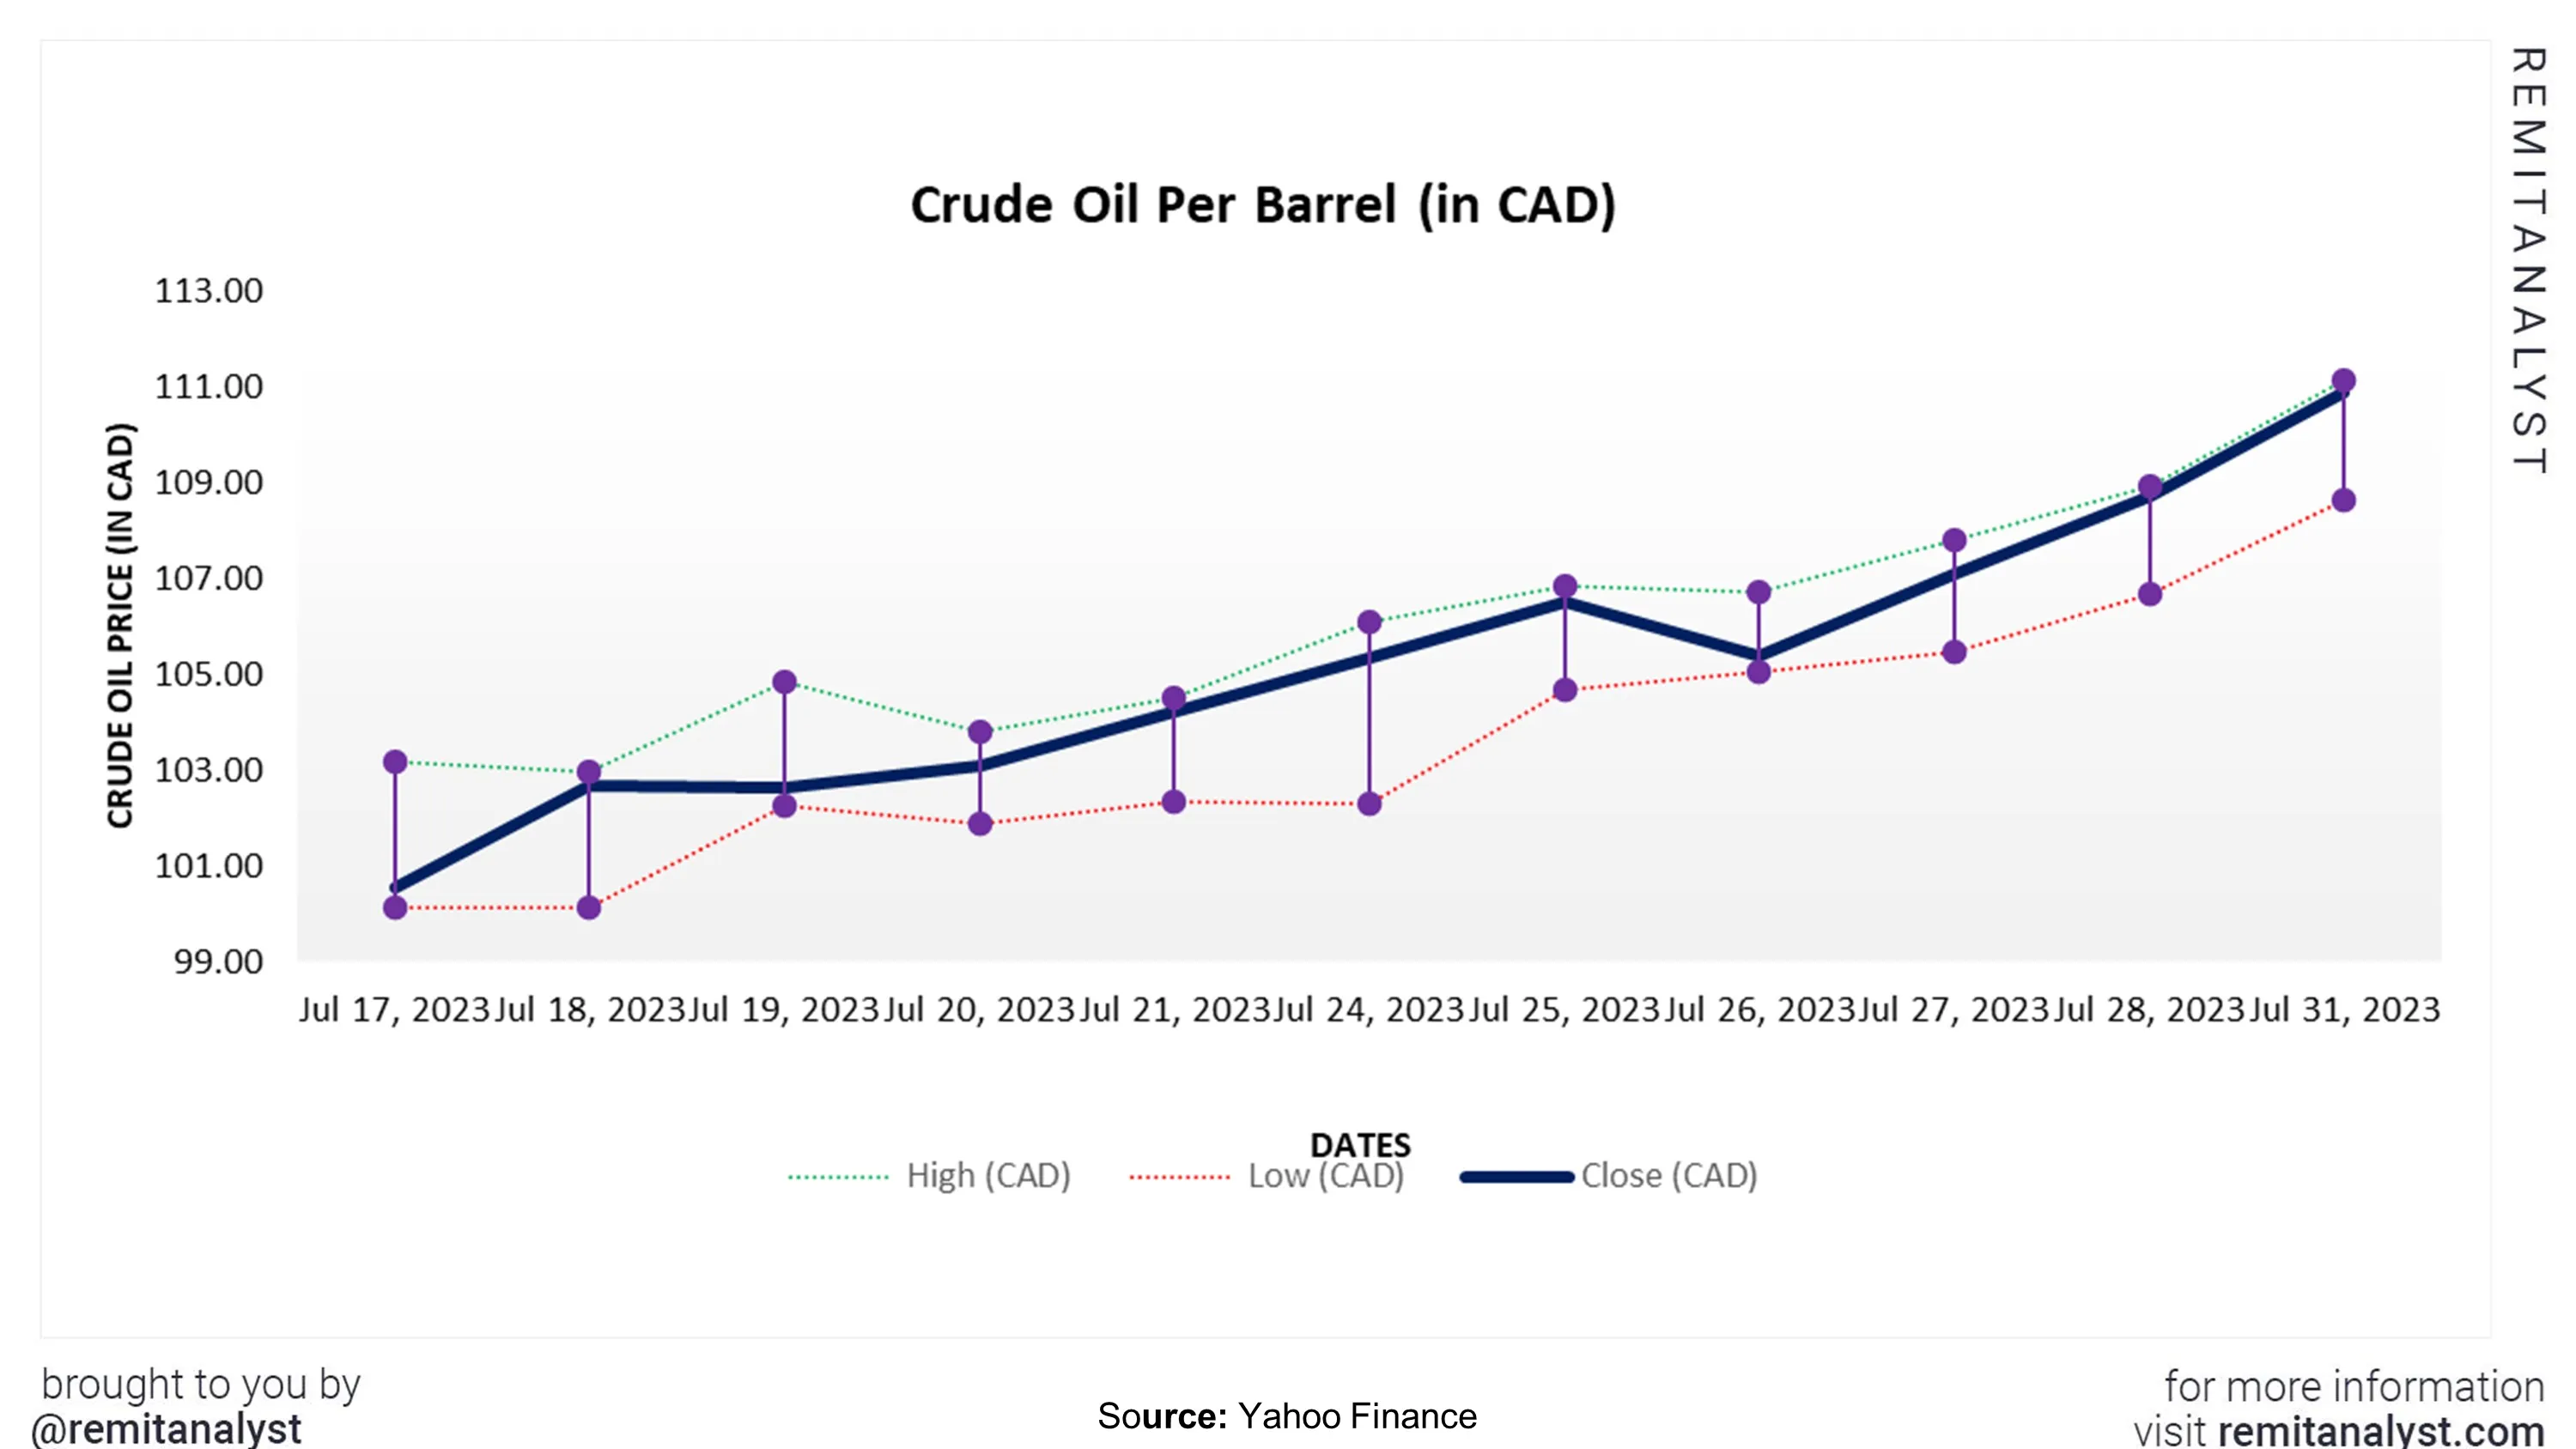 crude-oil-prices-canada-from-17-july-2023-to-31-july-2023